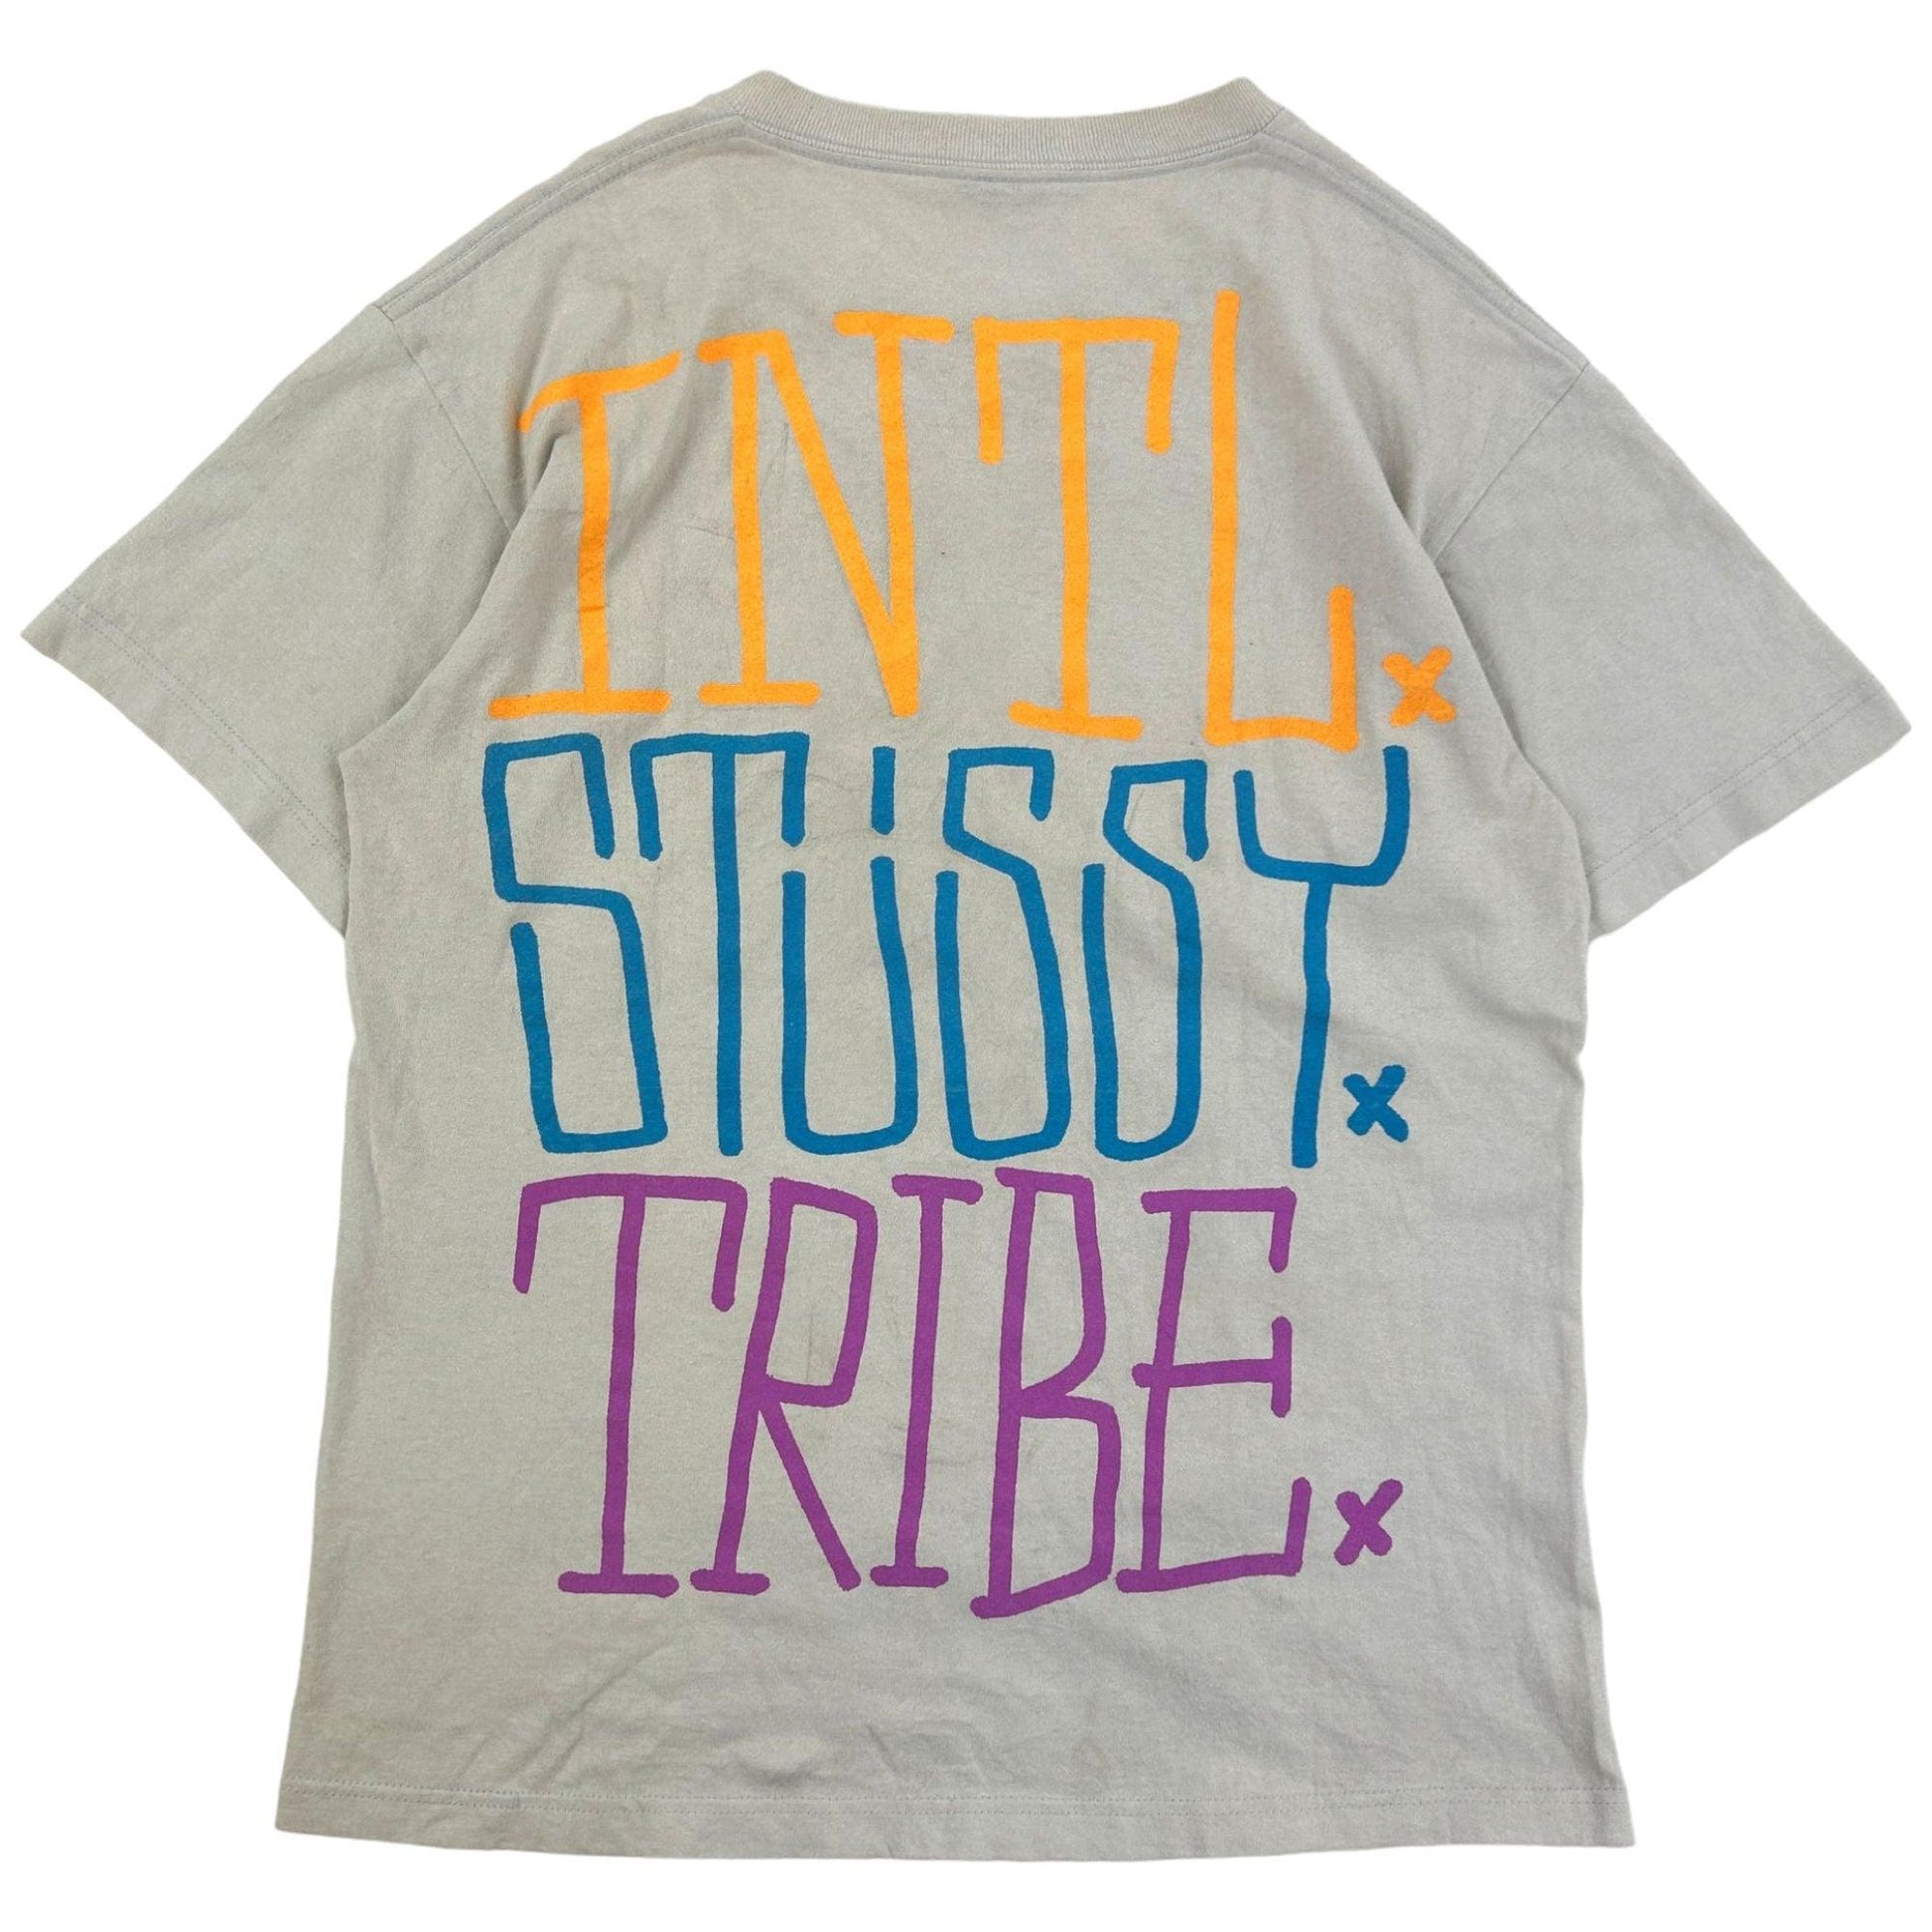 Vintage Stussy International Tribe Graphic T-Shirt Size M - Known Source